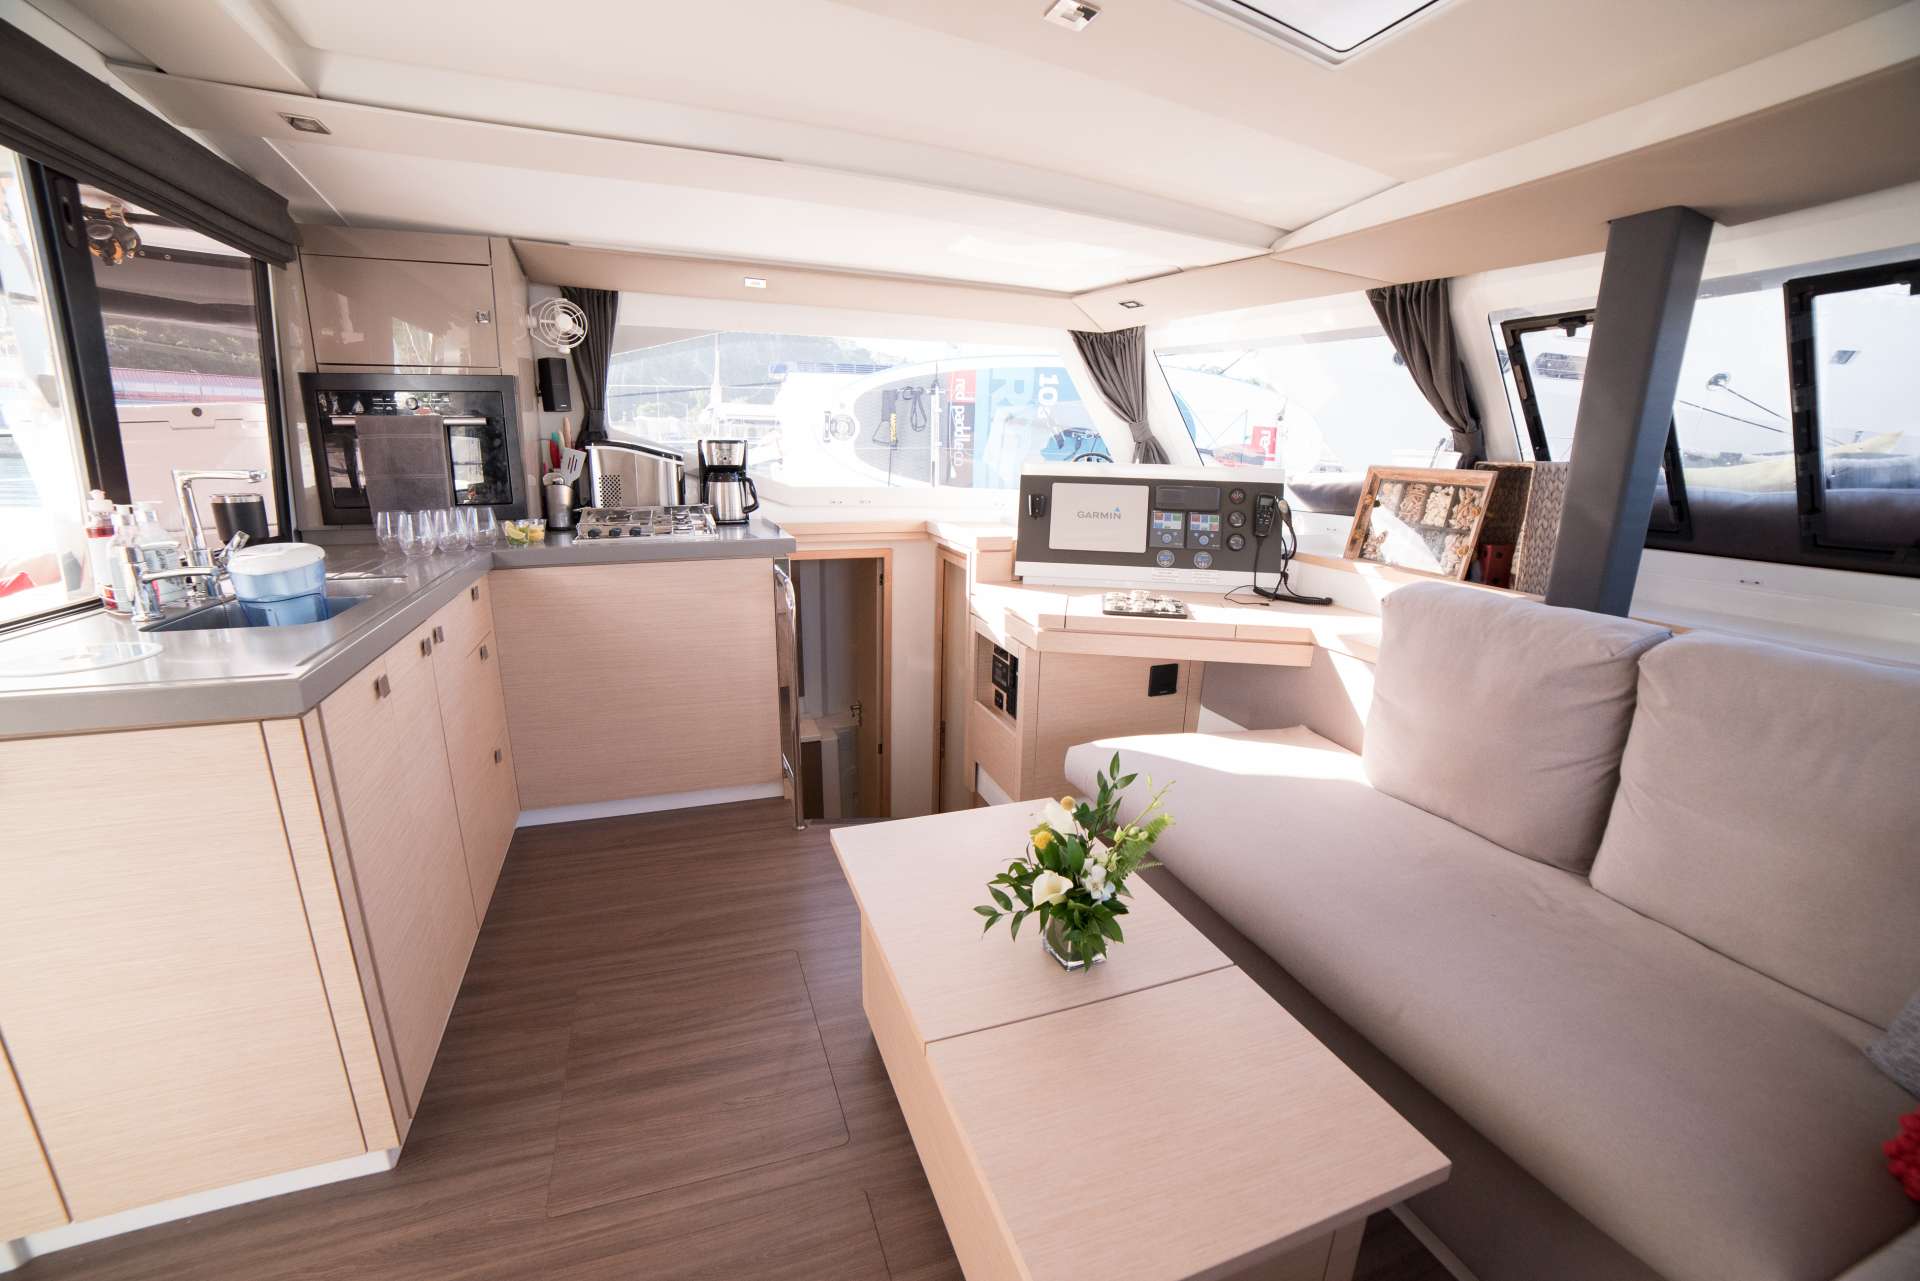 3 SISTERS Yacht Charter - Galley